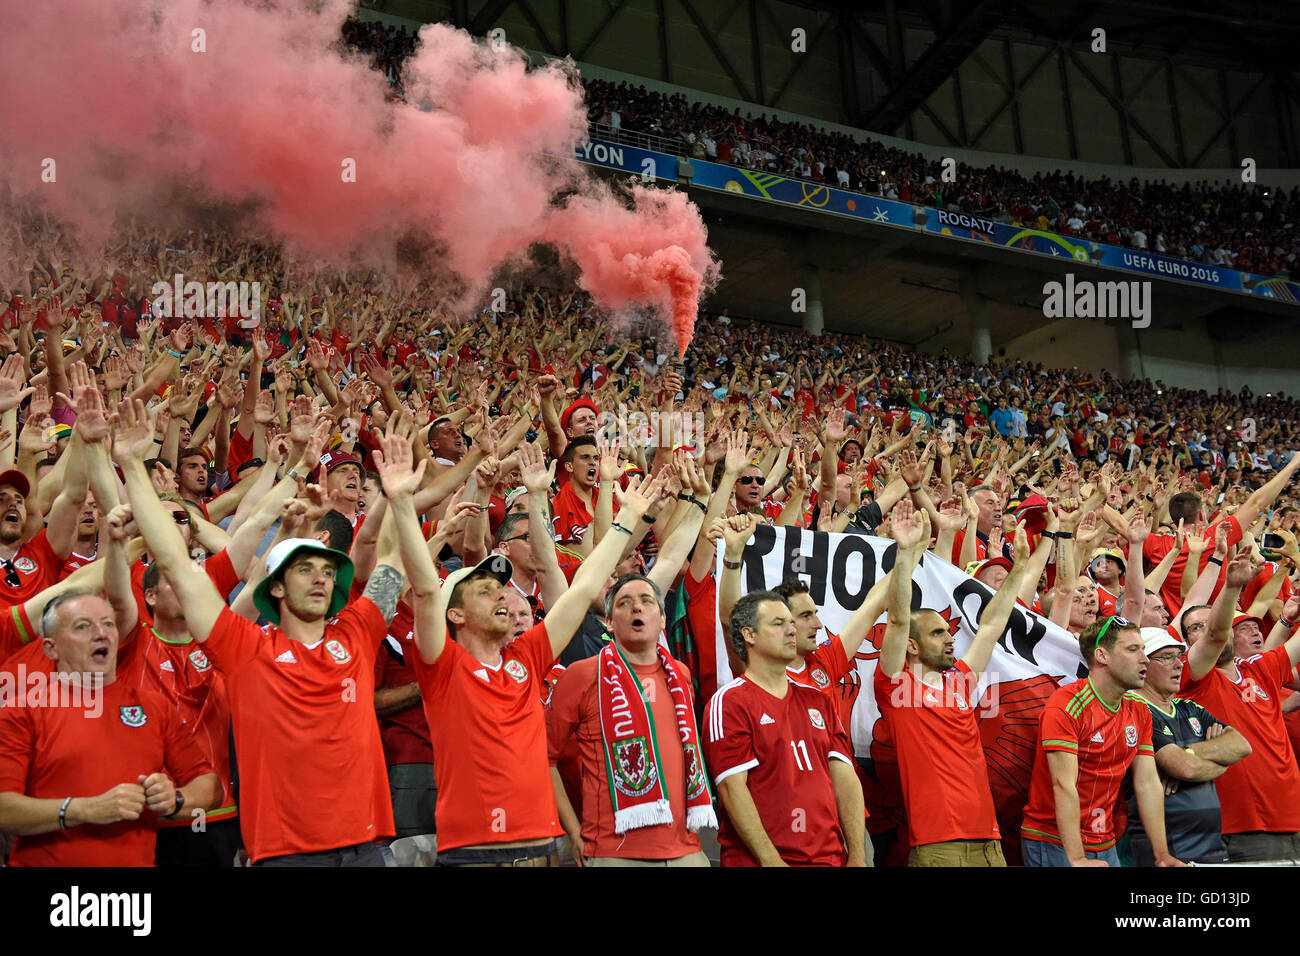 Welsh fans sing the Welsh national anthem at the Welsh Football team after defeat in the Euro 2016 Semi-Final between Portugal and Wales at the Parc Olympique Lyonnais in Lyon, France. Stock Photo